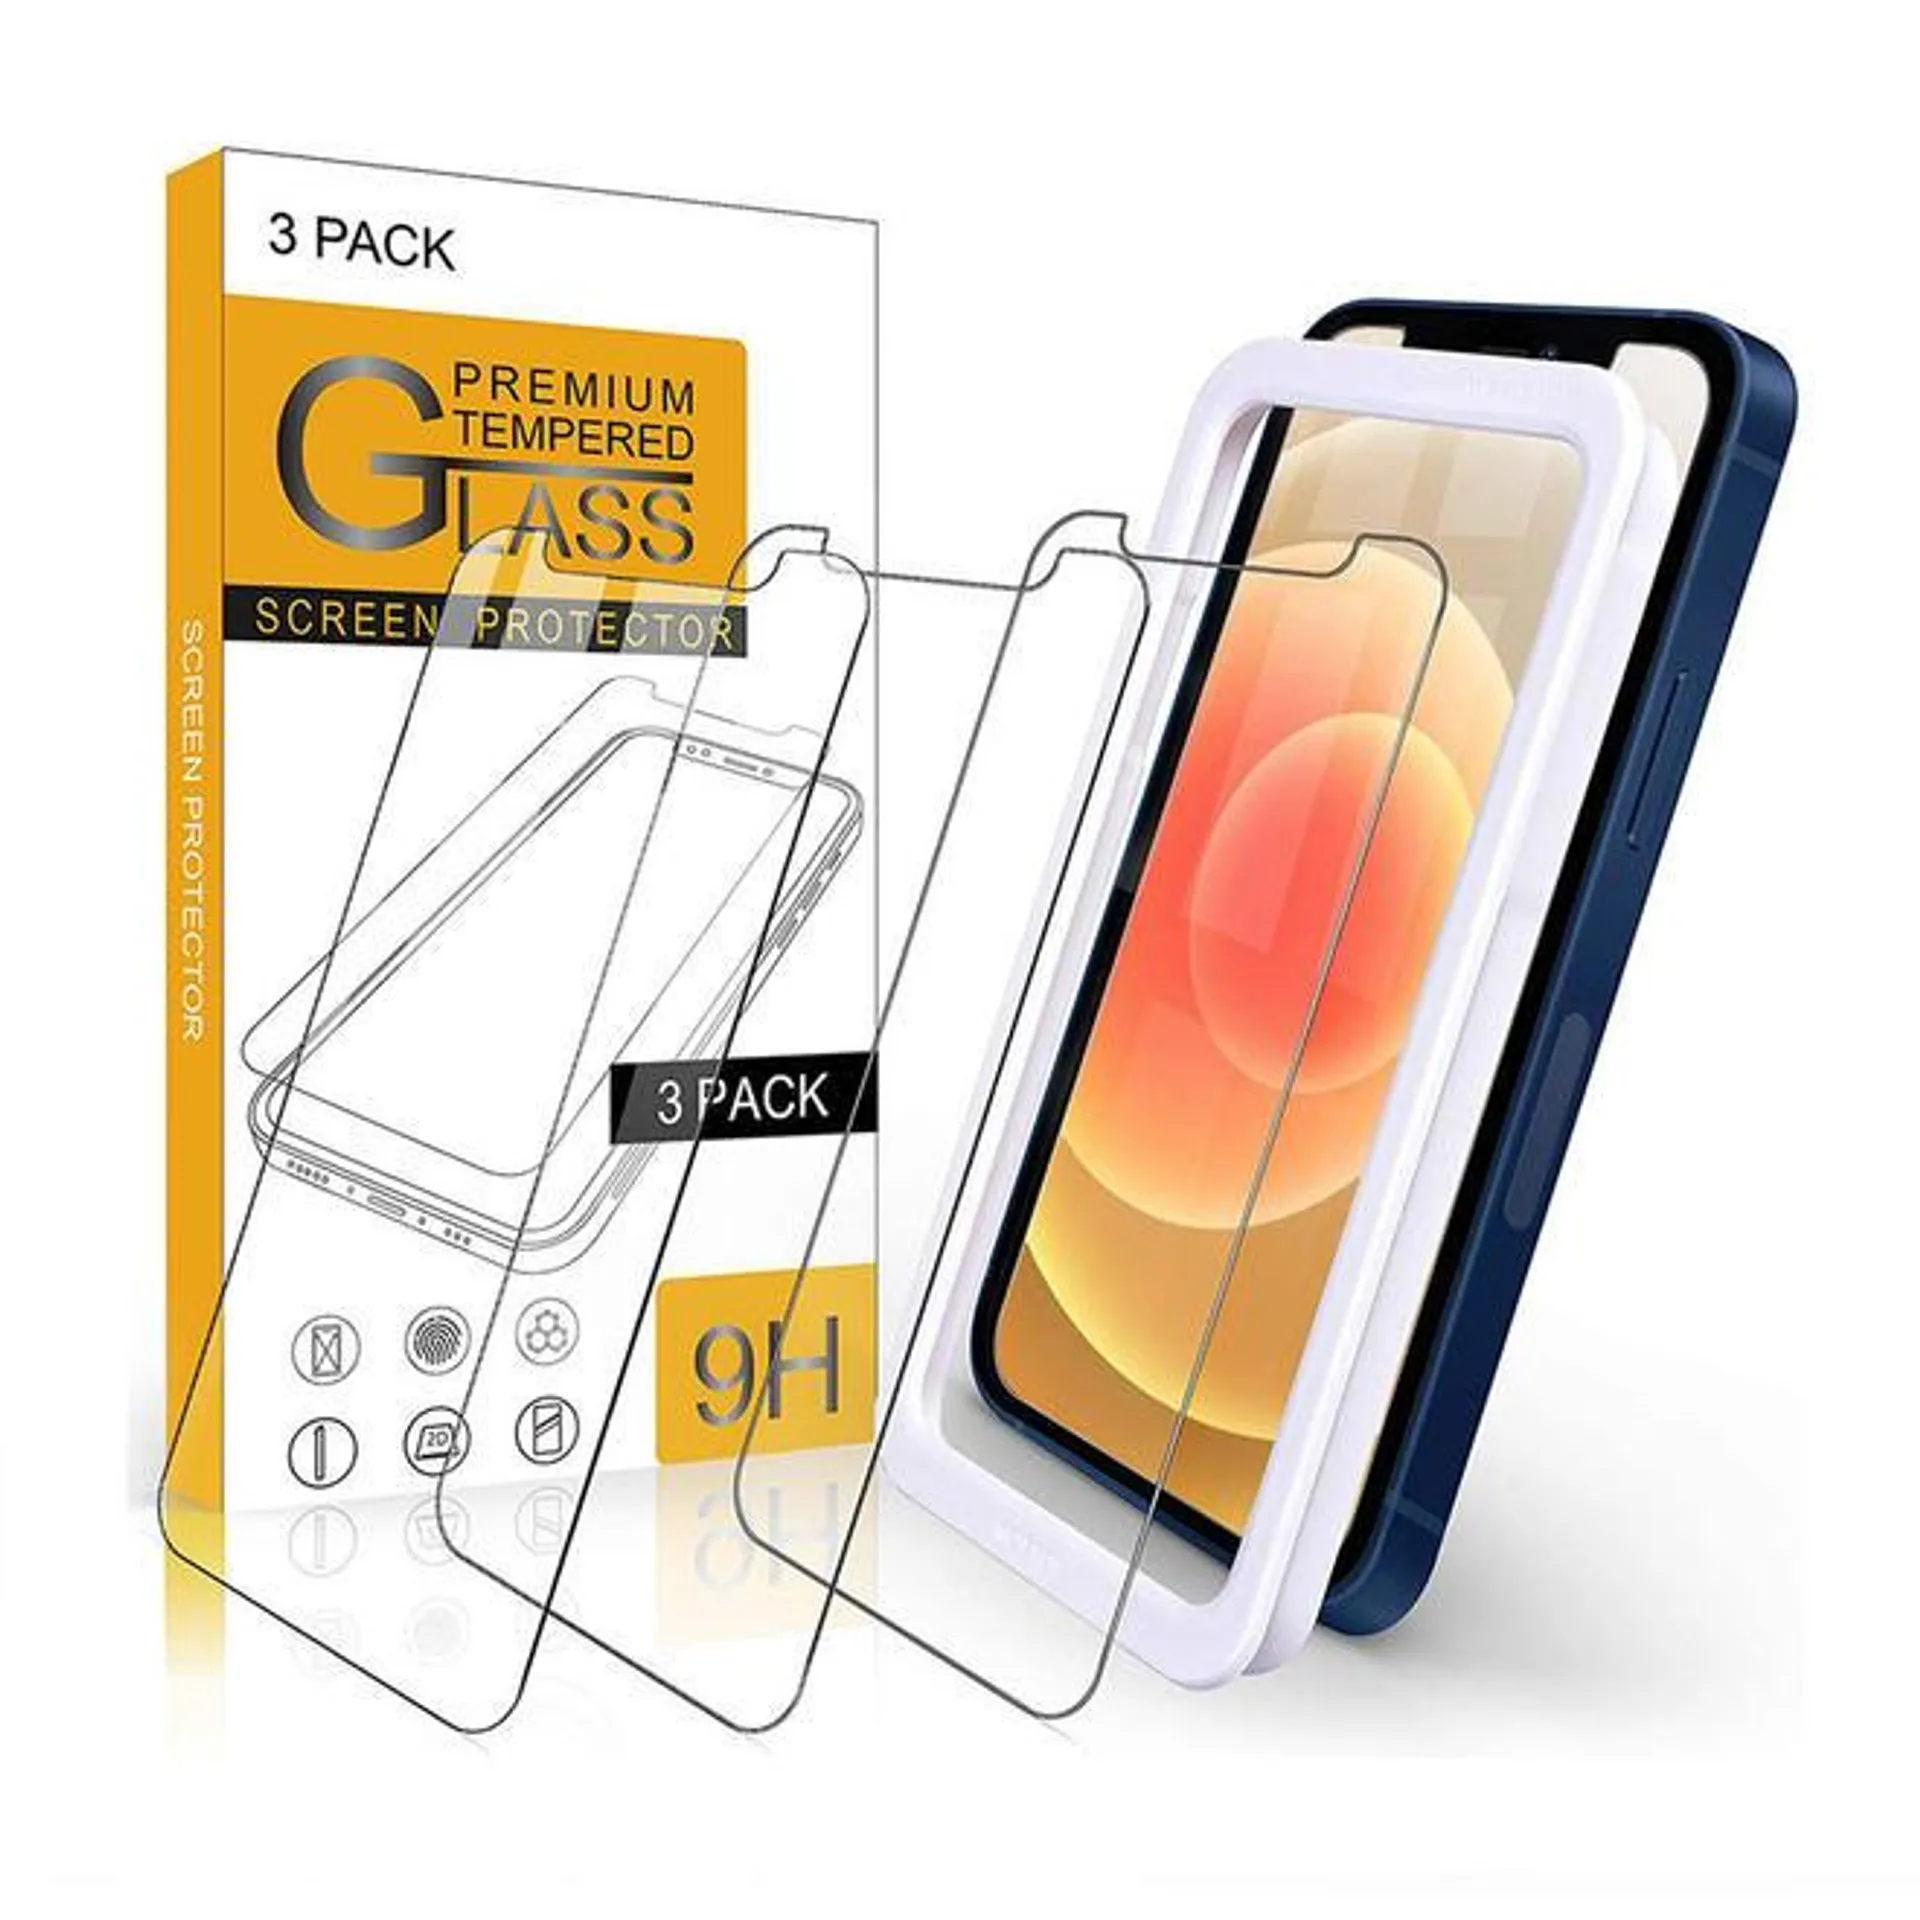 High Definition Anti-Scratch Sensitive Screen Protector for iPhone12 6.1 inch 3 Pack - PrimeCables®